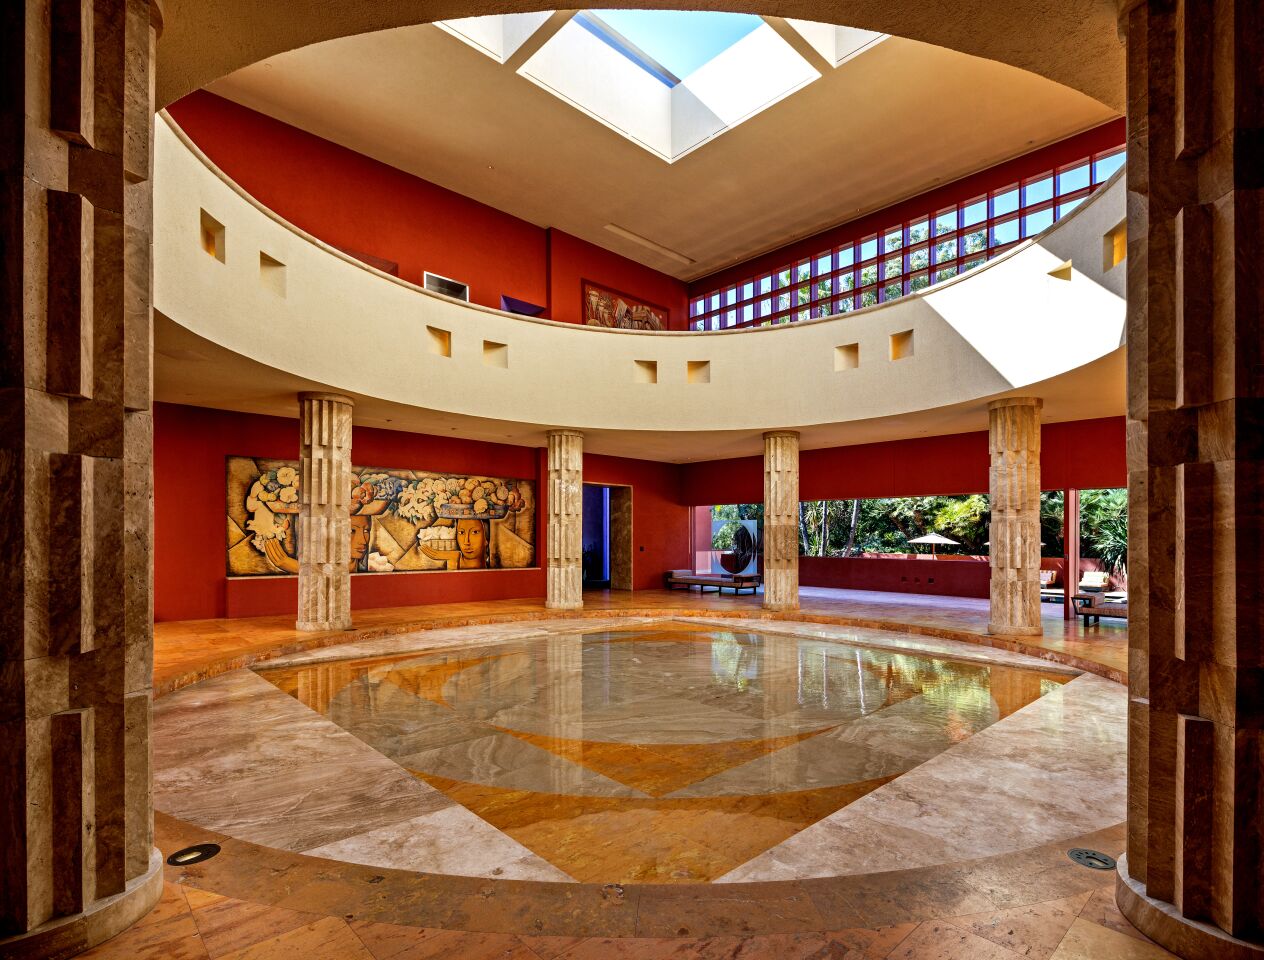 Features of the 26,000-square-foot house include a circular atrium.